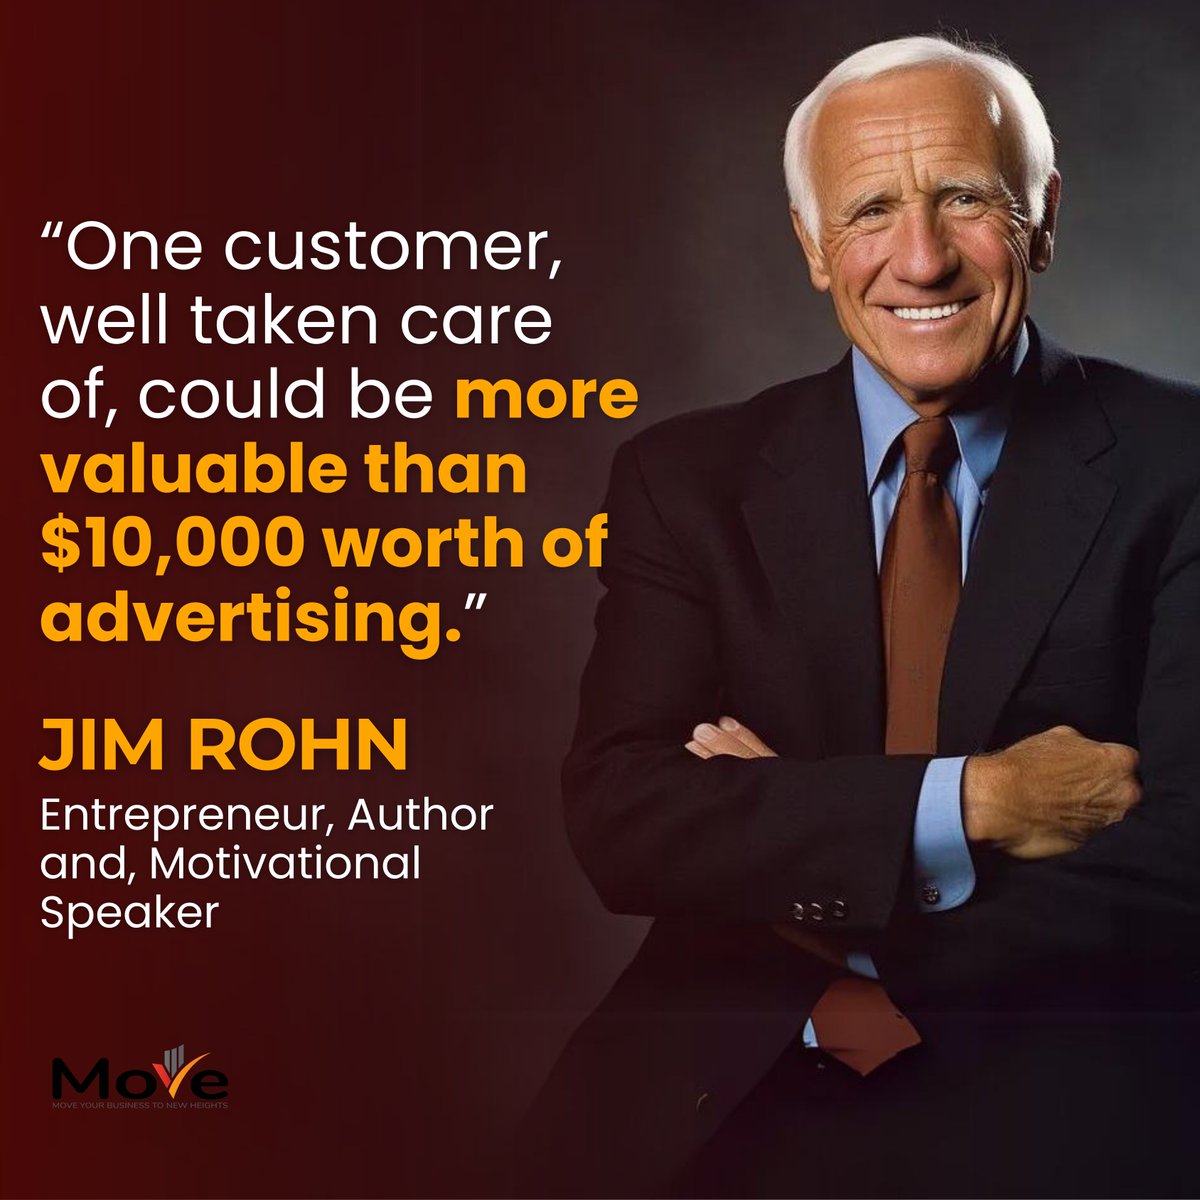 How important is customer care to you and your team? Jim Rohn shares just how much you stand to gain when you prioritize your relationship with your customers.

How are you going to advance your customer care efforts?

#CustomerExperience #CustomerCare #BusinessGrowth #Sales